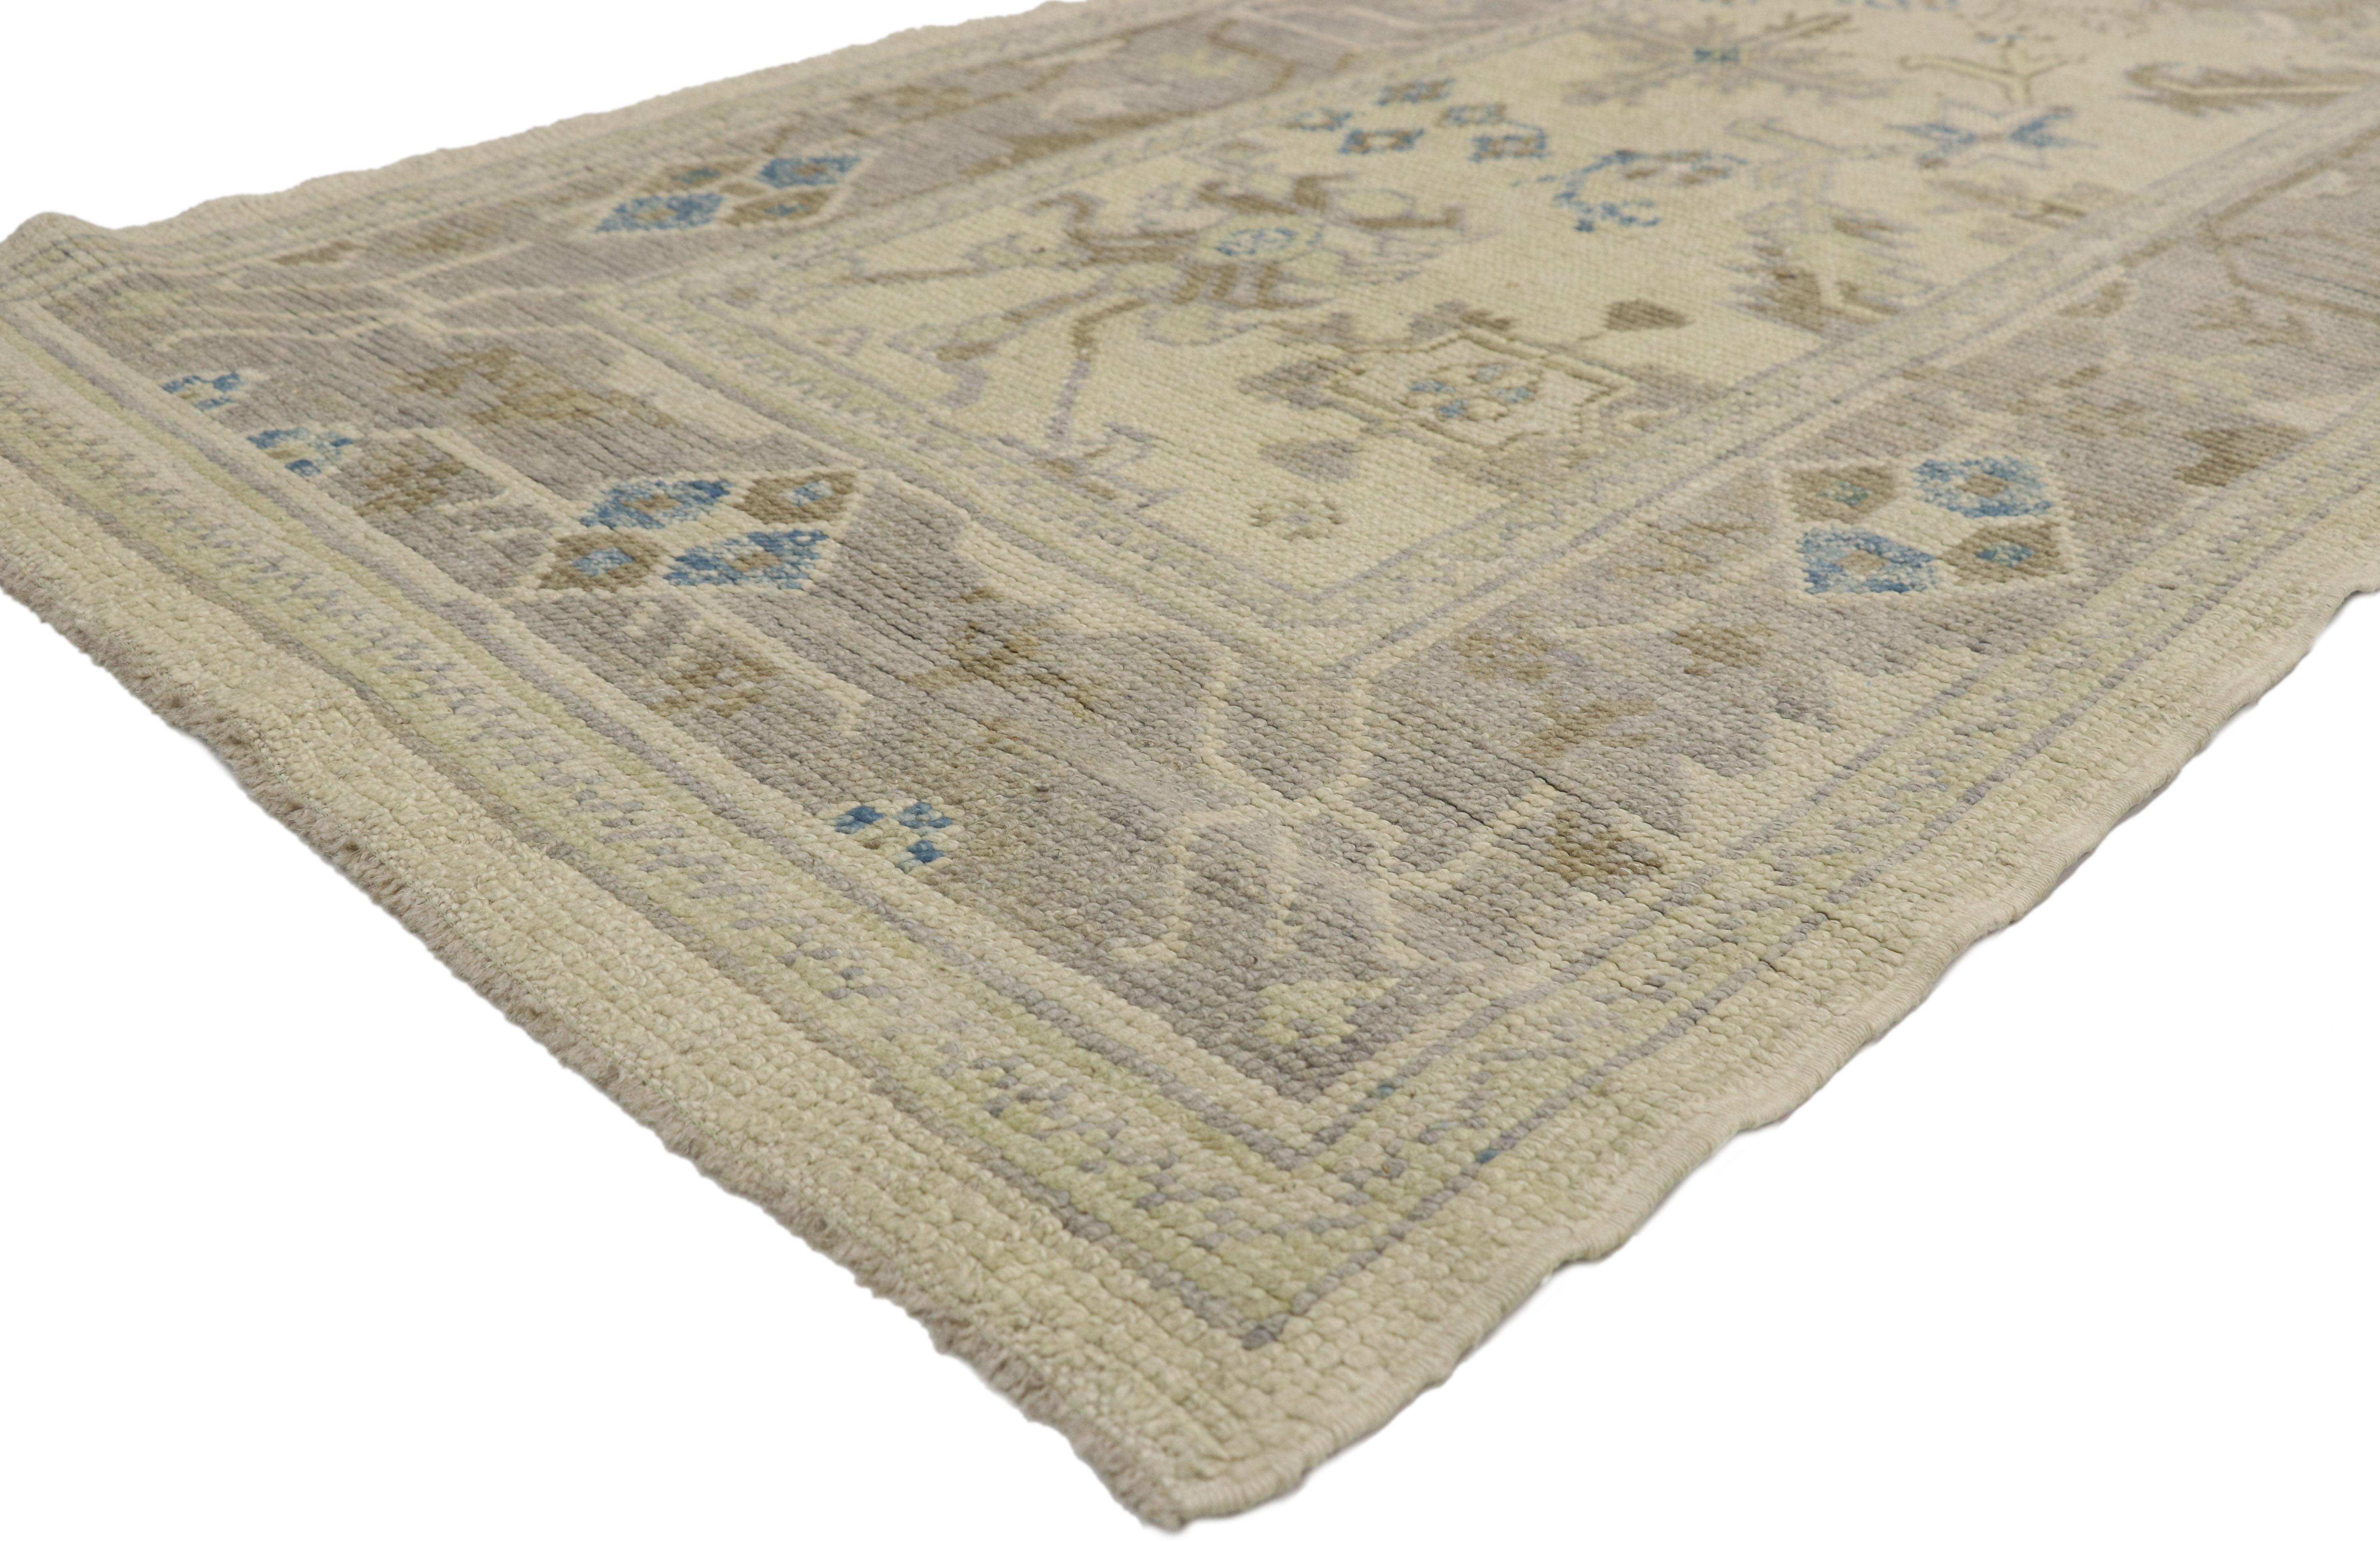 51633 New Transitional Turkish Oushak Runner with Hampton's Chic Coastal Style 03'04 x 13'04. This hand-knotted wool new Turkish Oushak runner features an all-over geometric pattern composed of blooming palmettes, stylized flowers, organic shapes,